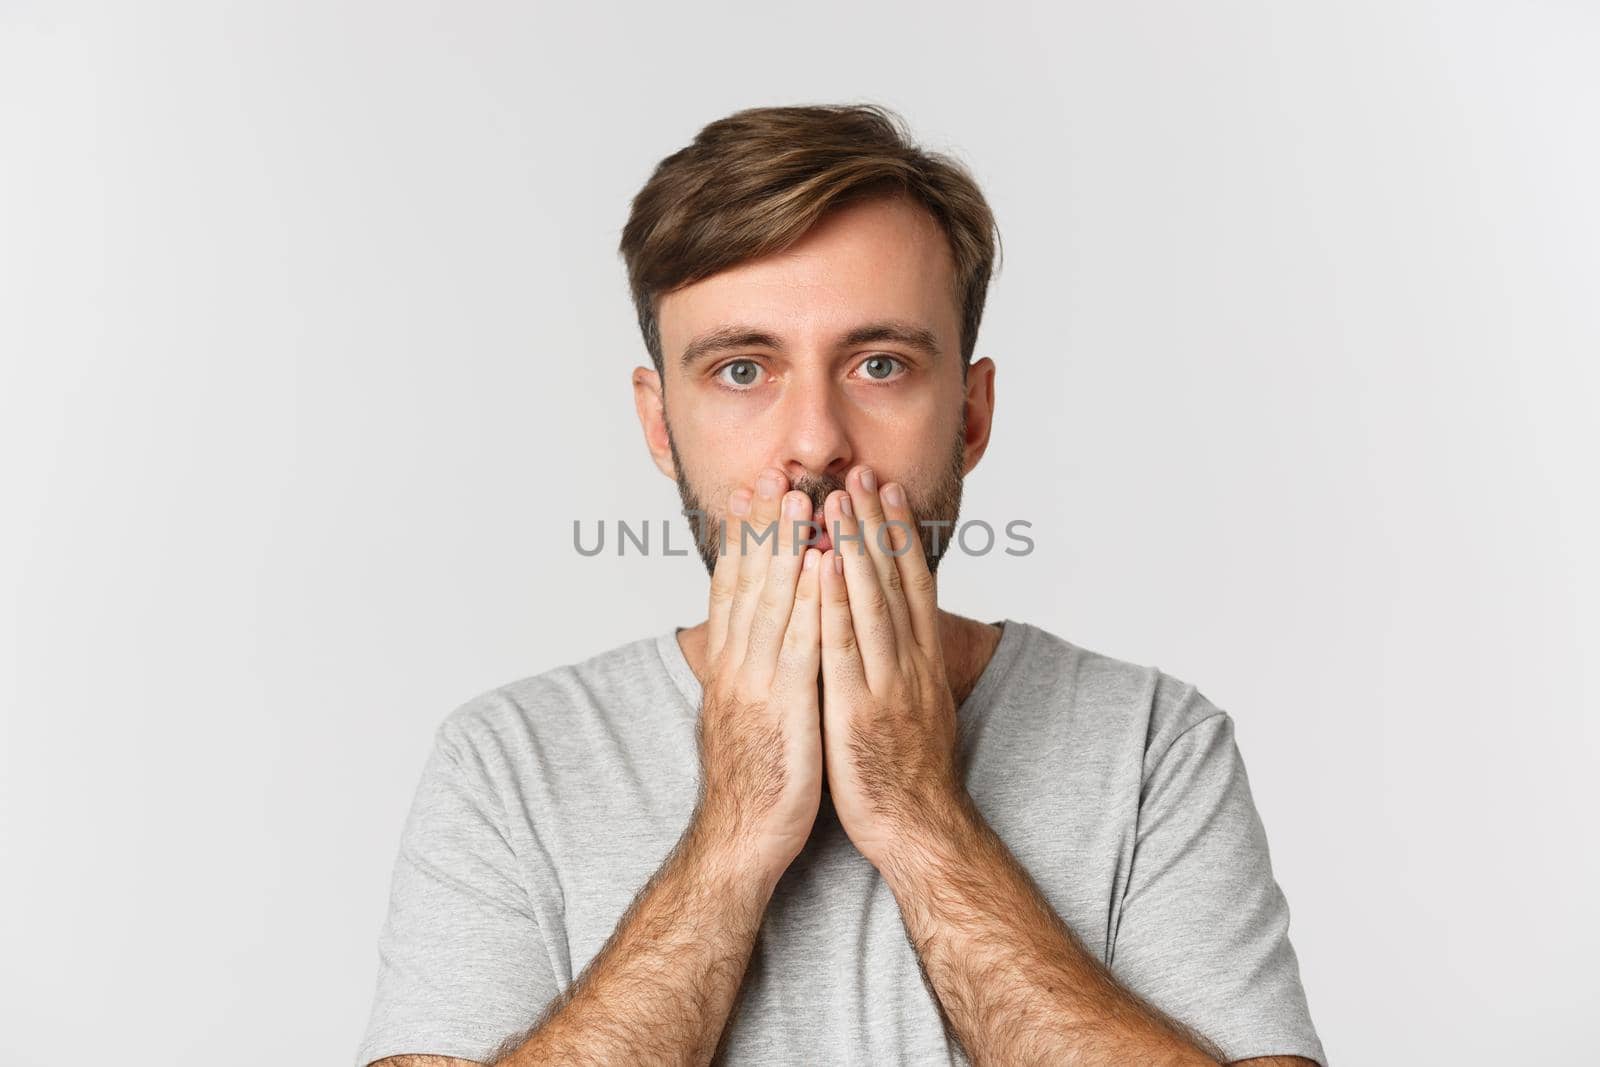 Close-up of shocked and speechless guy, cover mouth and looking at camera, standing over white background.